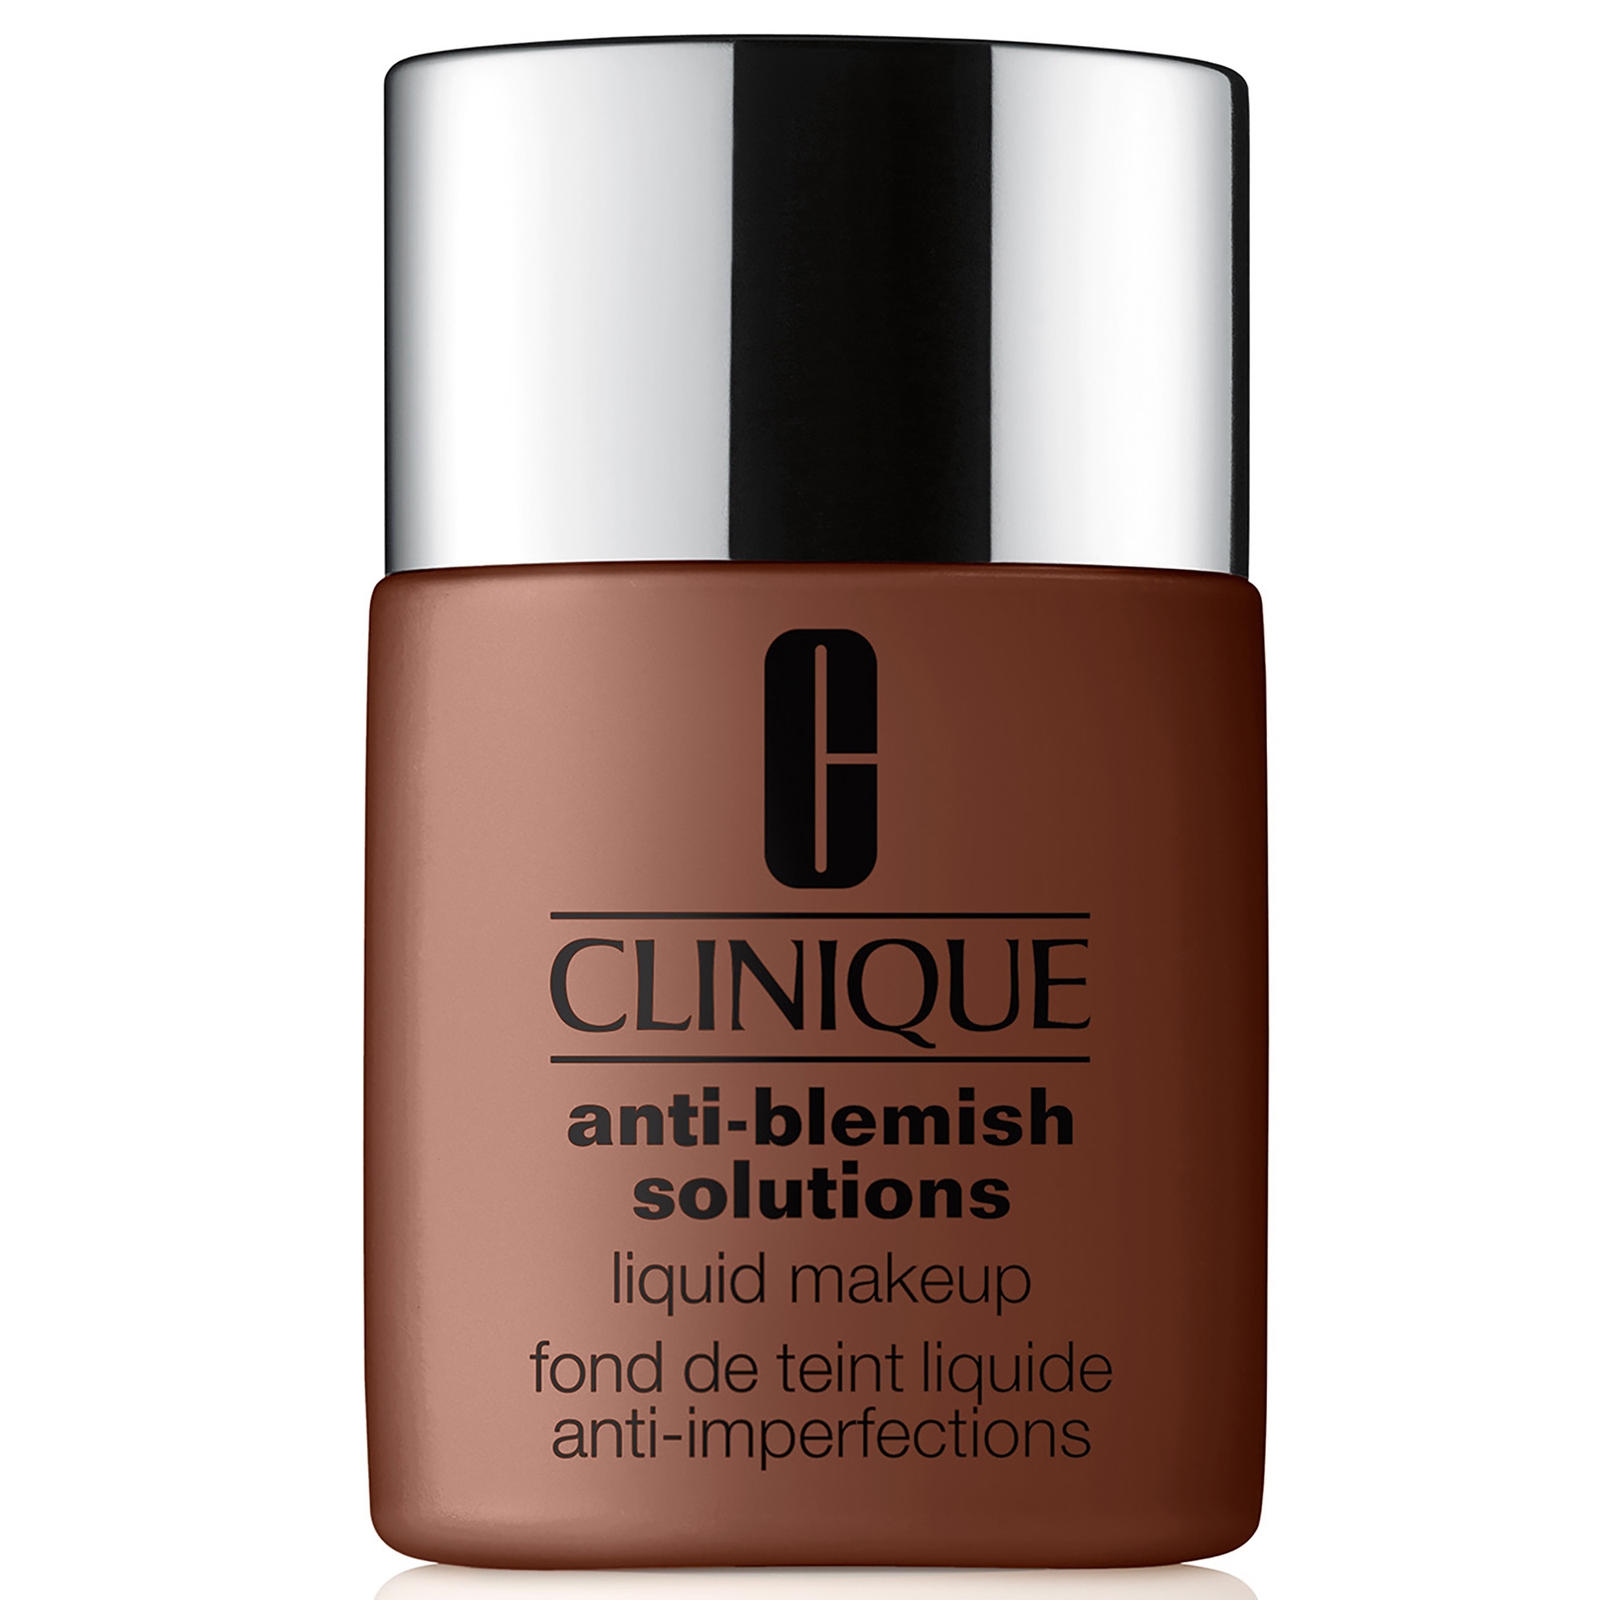 Image of Clinique Anti-Blemish Solutions Liquid Makeup with Salicylic Acid 30ml (Various Shades) - CN 126 Espresso